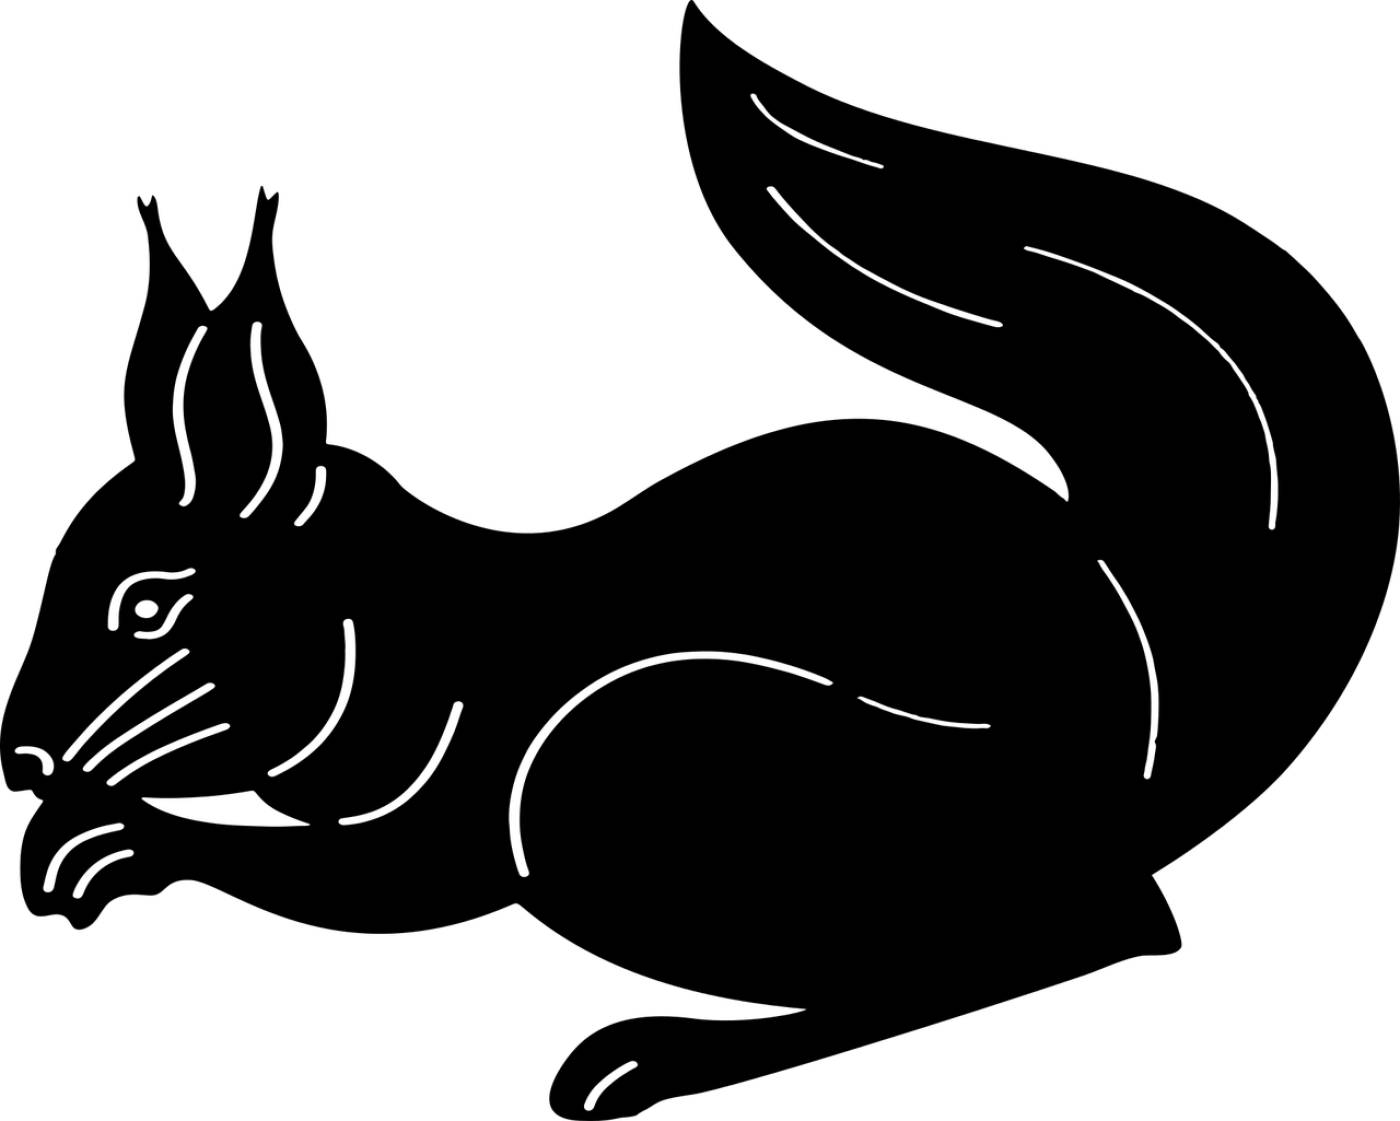 squirrel rodent animal silhouette  svg vector